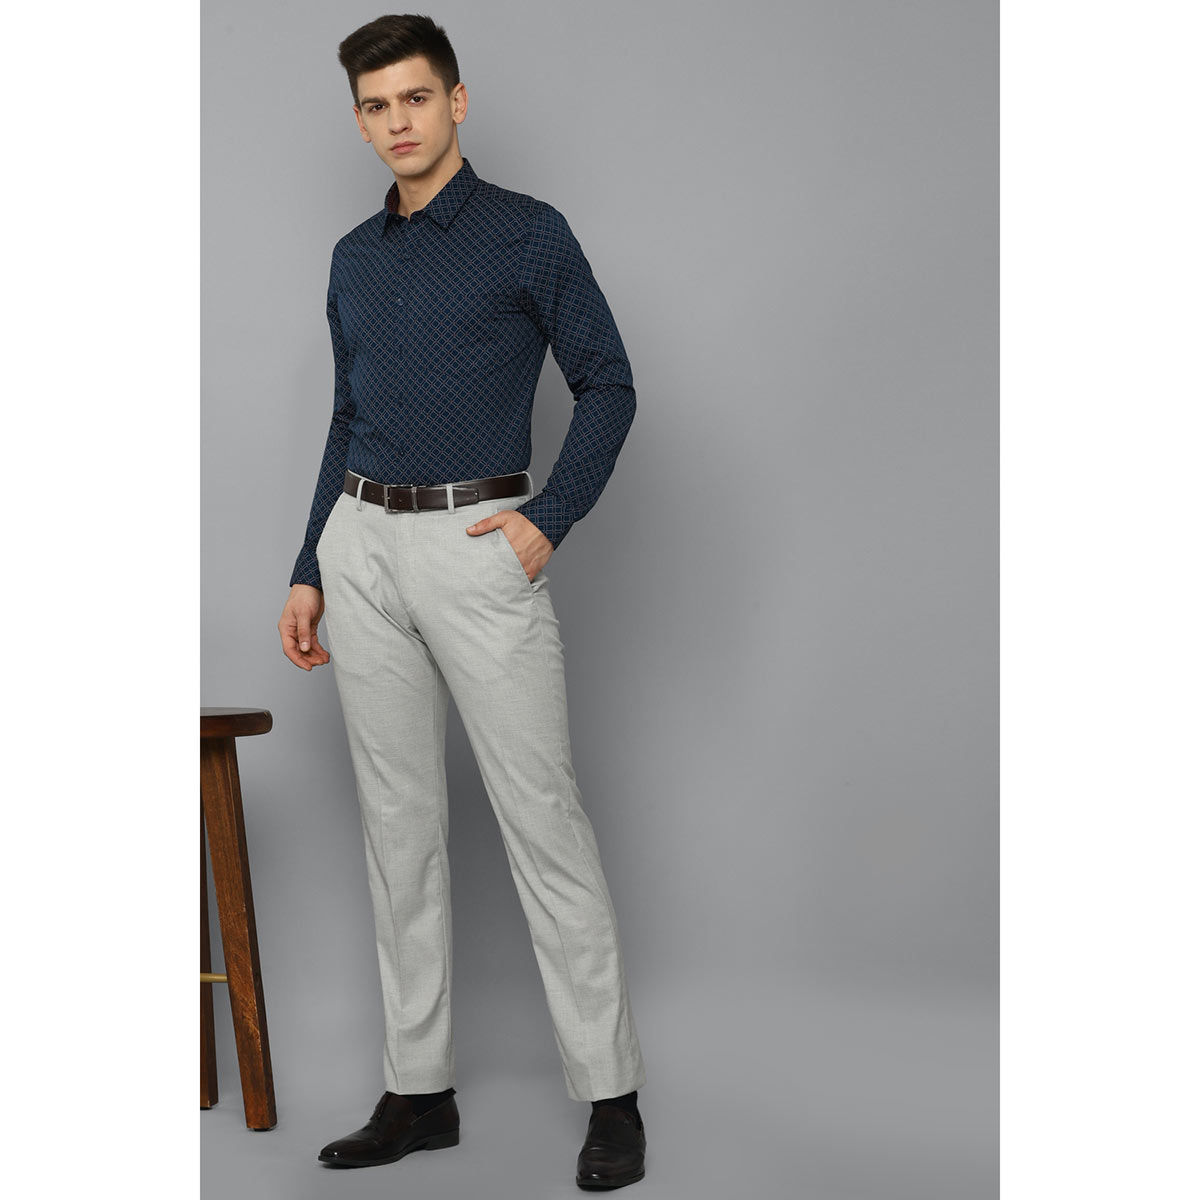 What To Wear With Grey Pants Outfit Ideas For Men